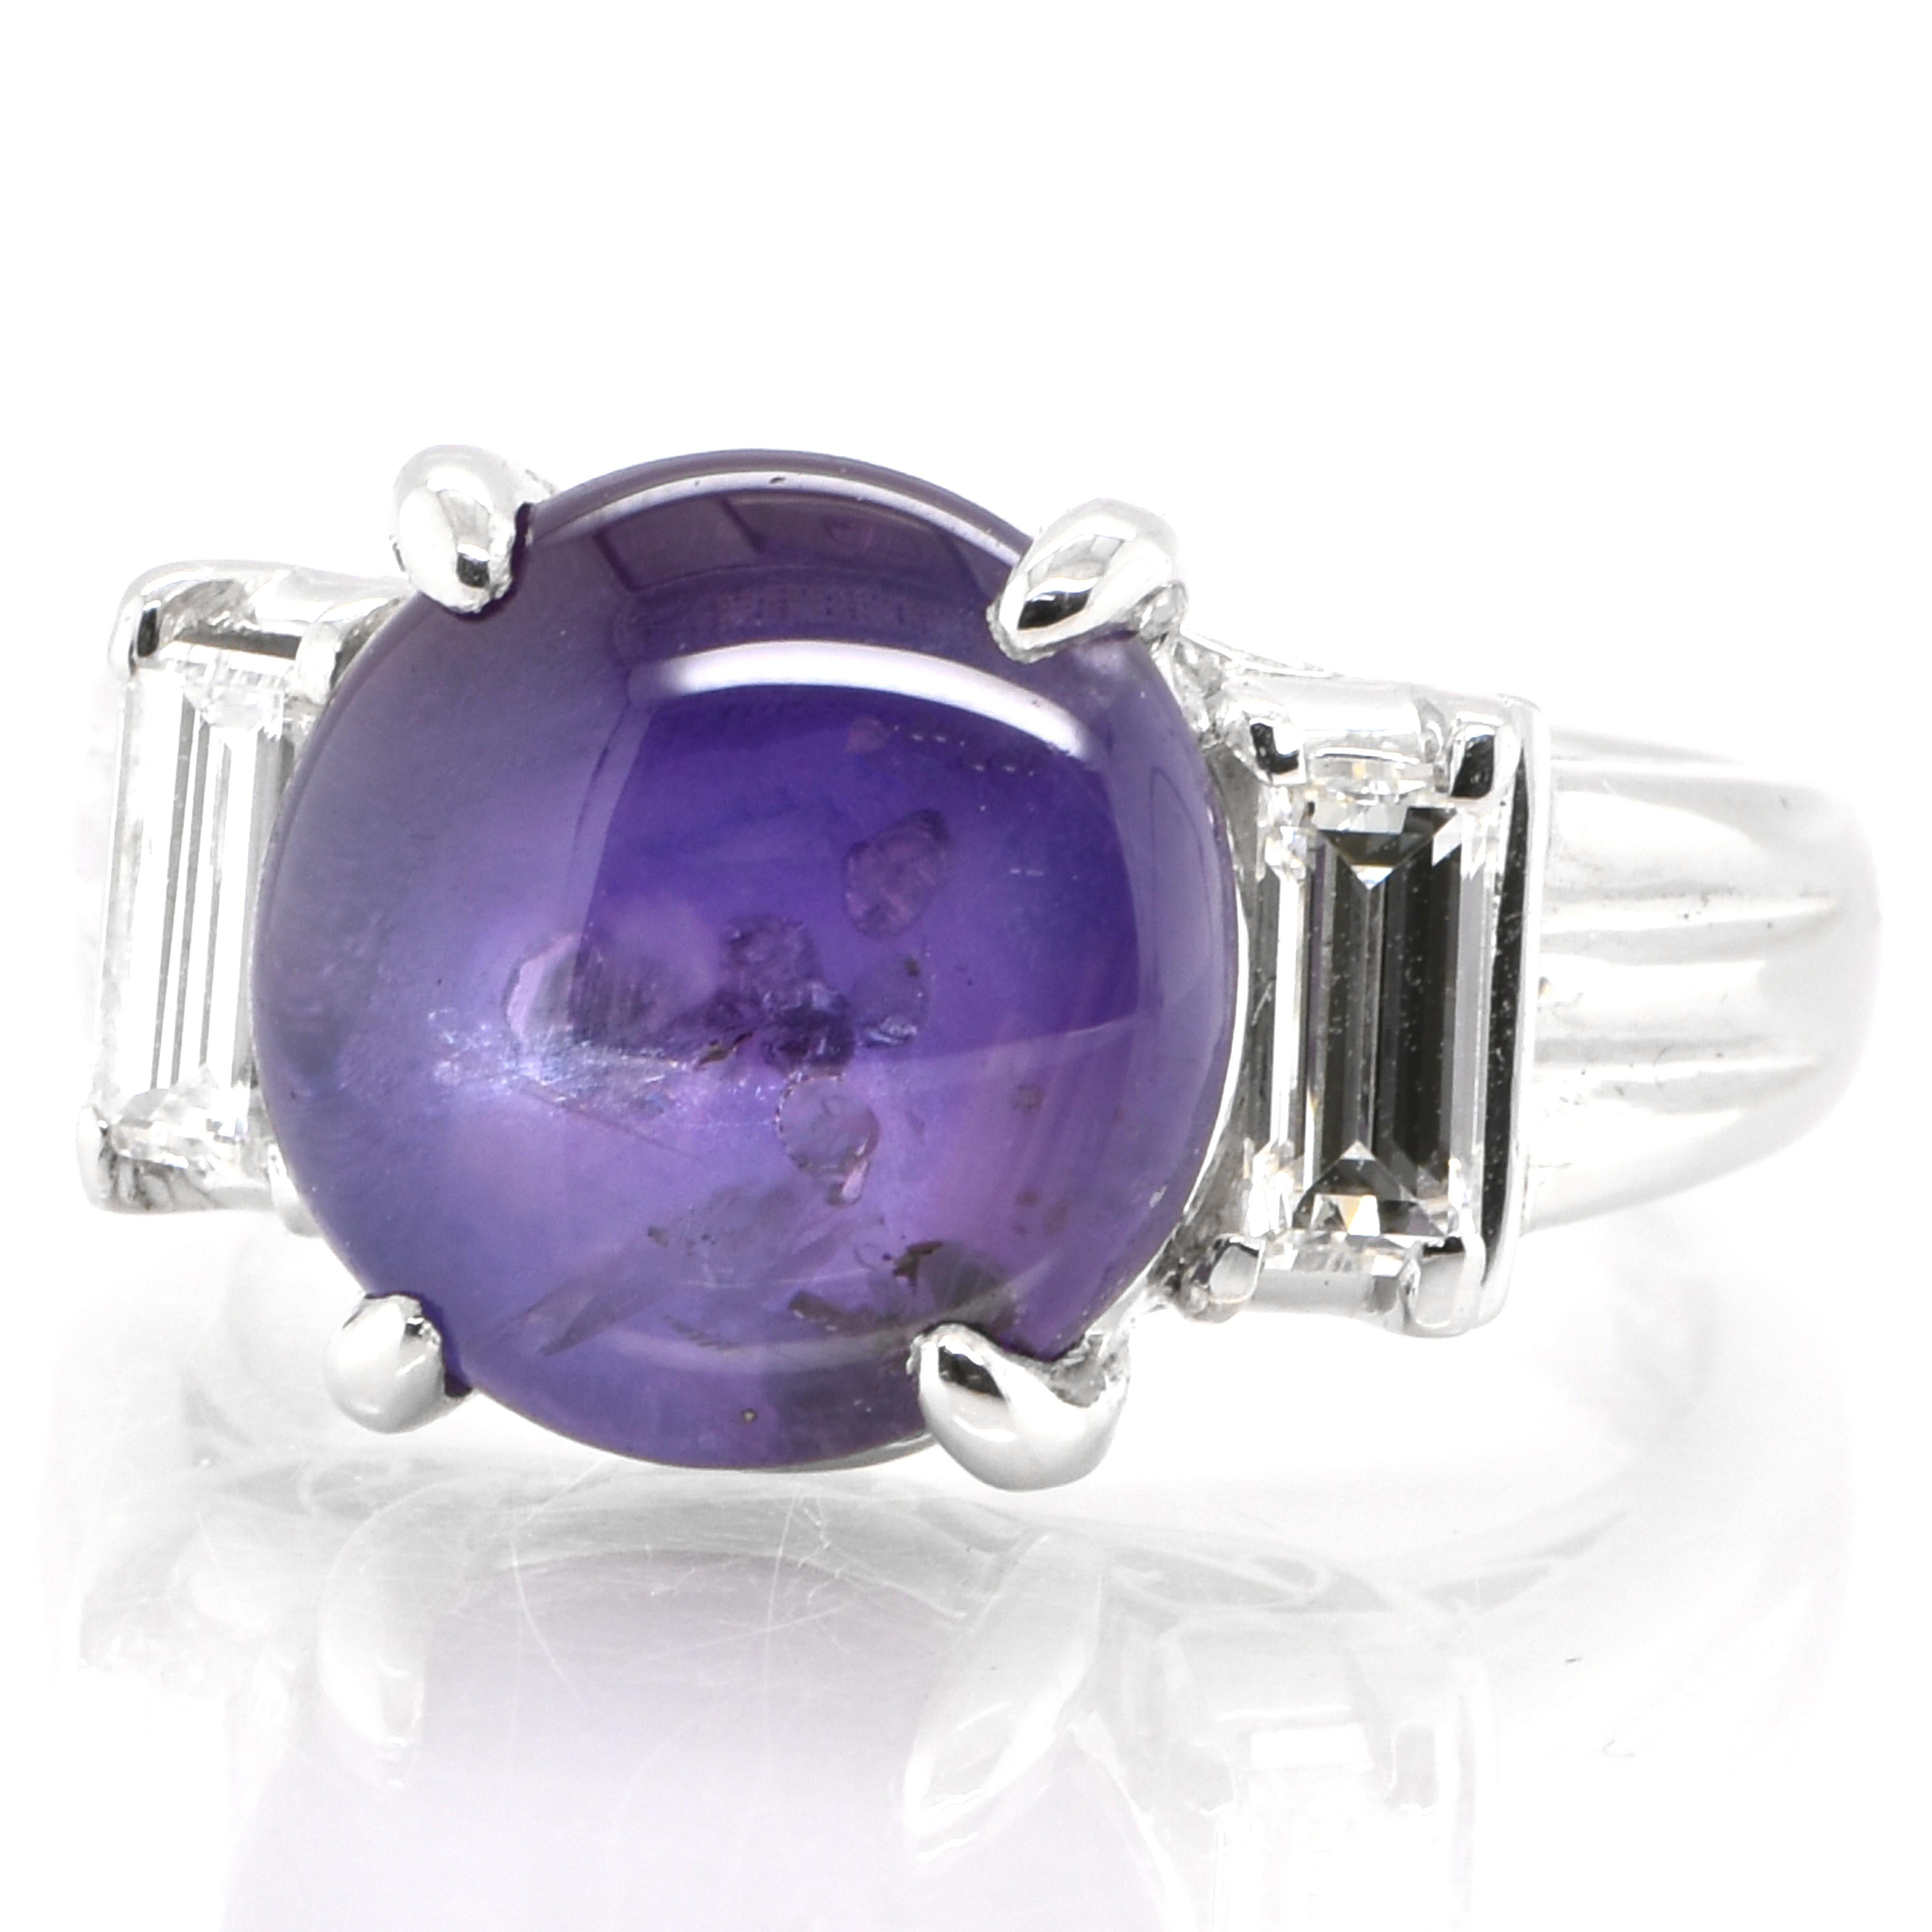 A beautiful Three Stone Ring featuring 9.67 Carat Natural Purple Star Sapphire and 0.64 Carats Diamond Accents set in Platinum. Sapphires have extraordinary durability - they excel in hardness as well as toughness and durability making them very